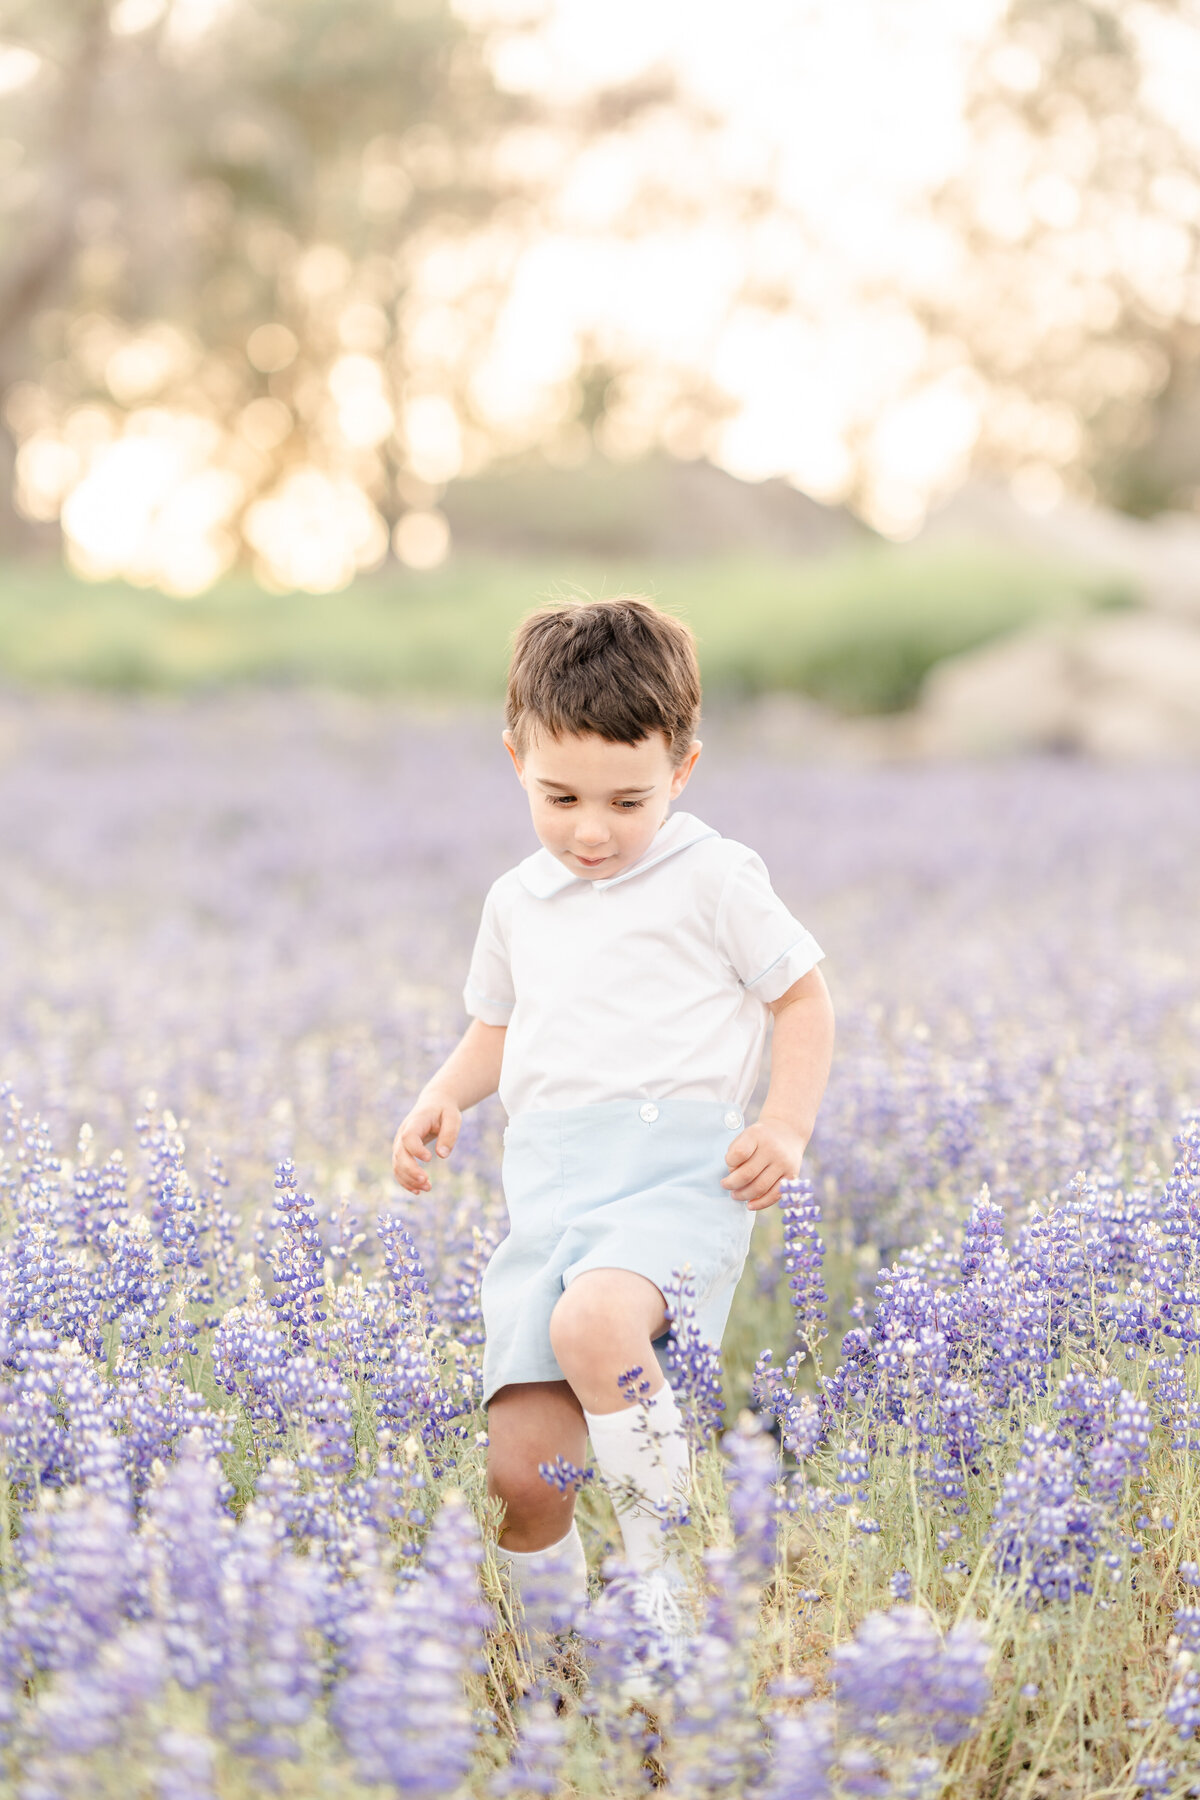 A young boy dressed in shades of white and light blue walks in a field of purple lupines photographed by bay area photographer, Light Livin Photography.